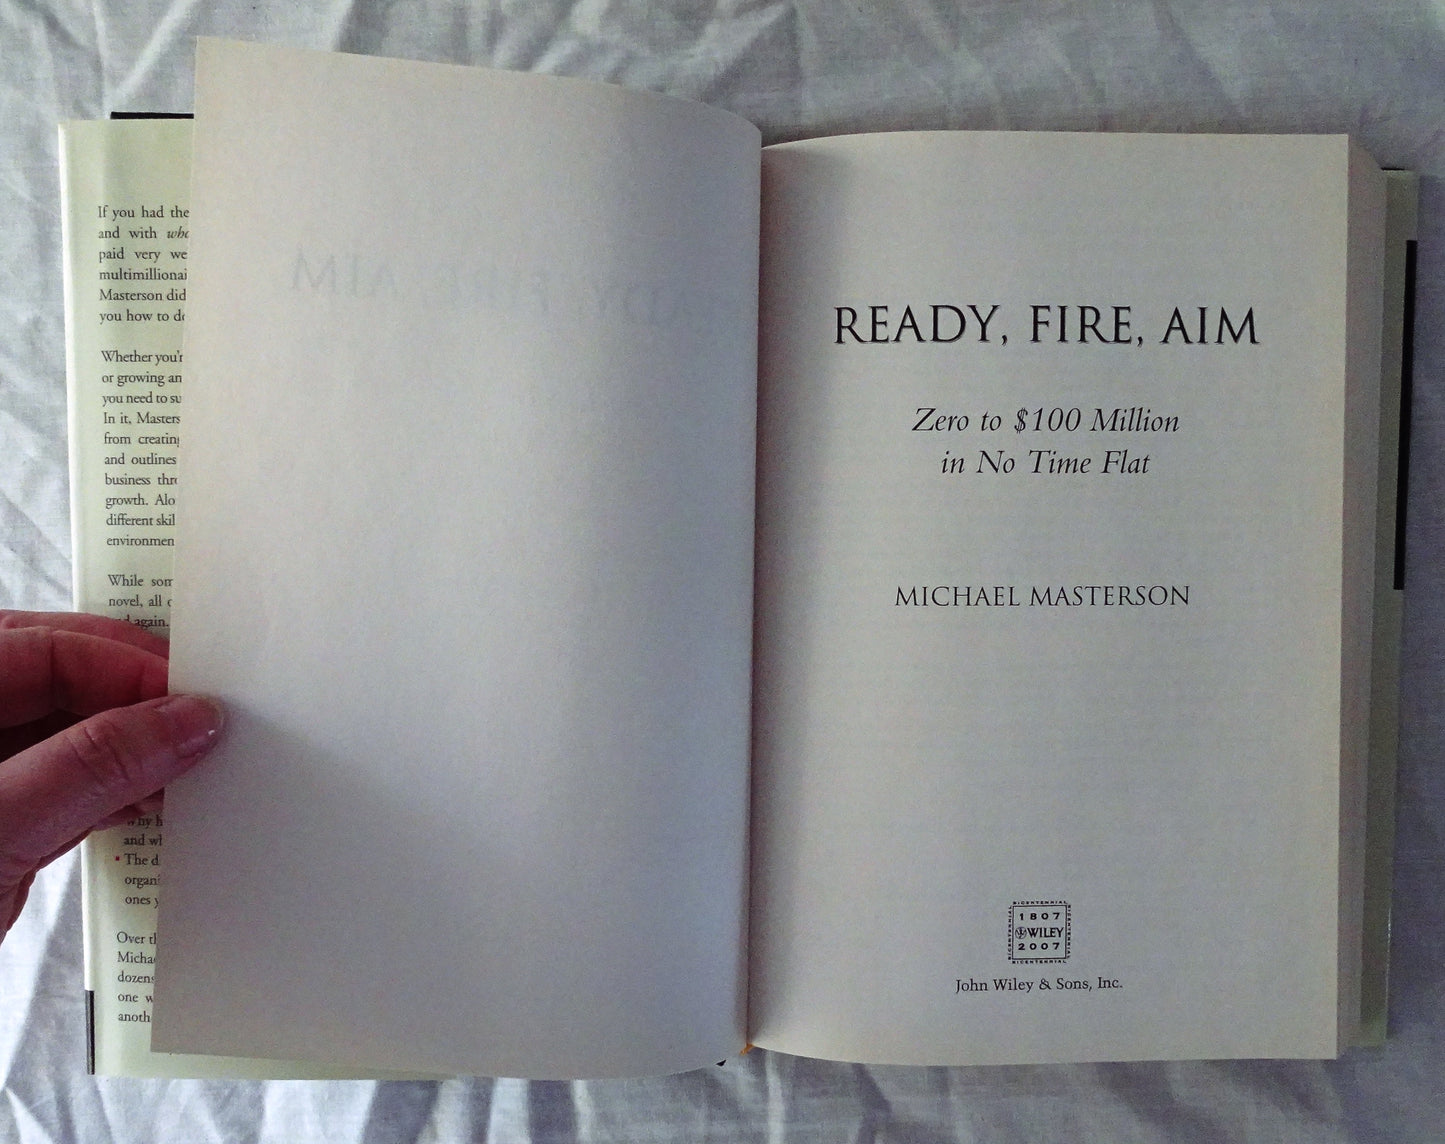 Ready, Fire, Aim by Michael Masterson